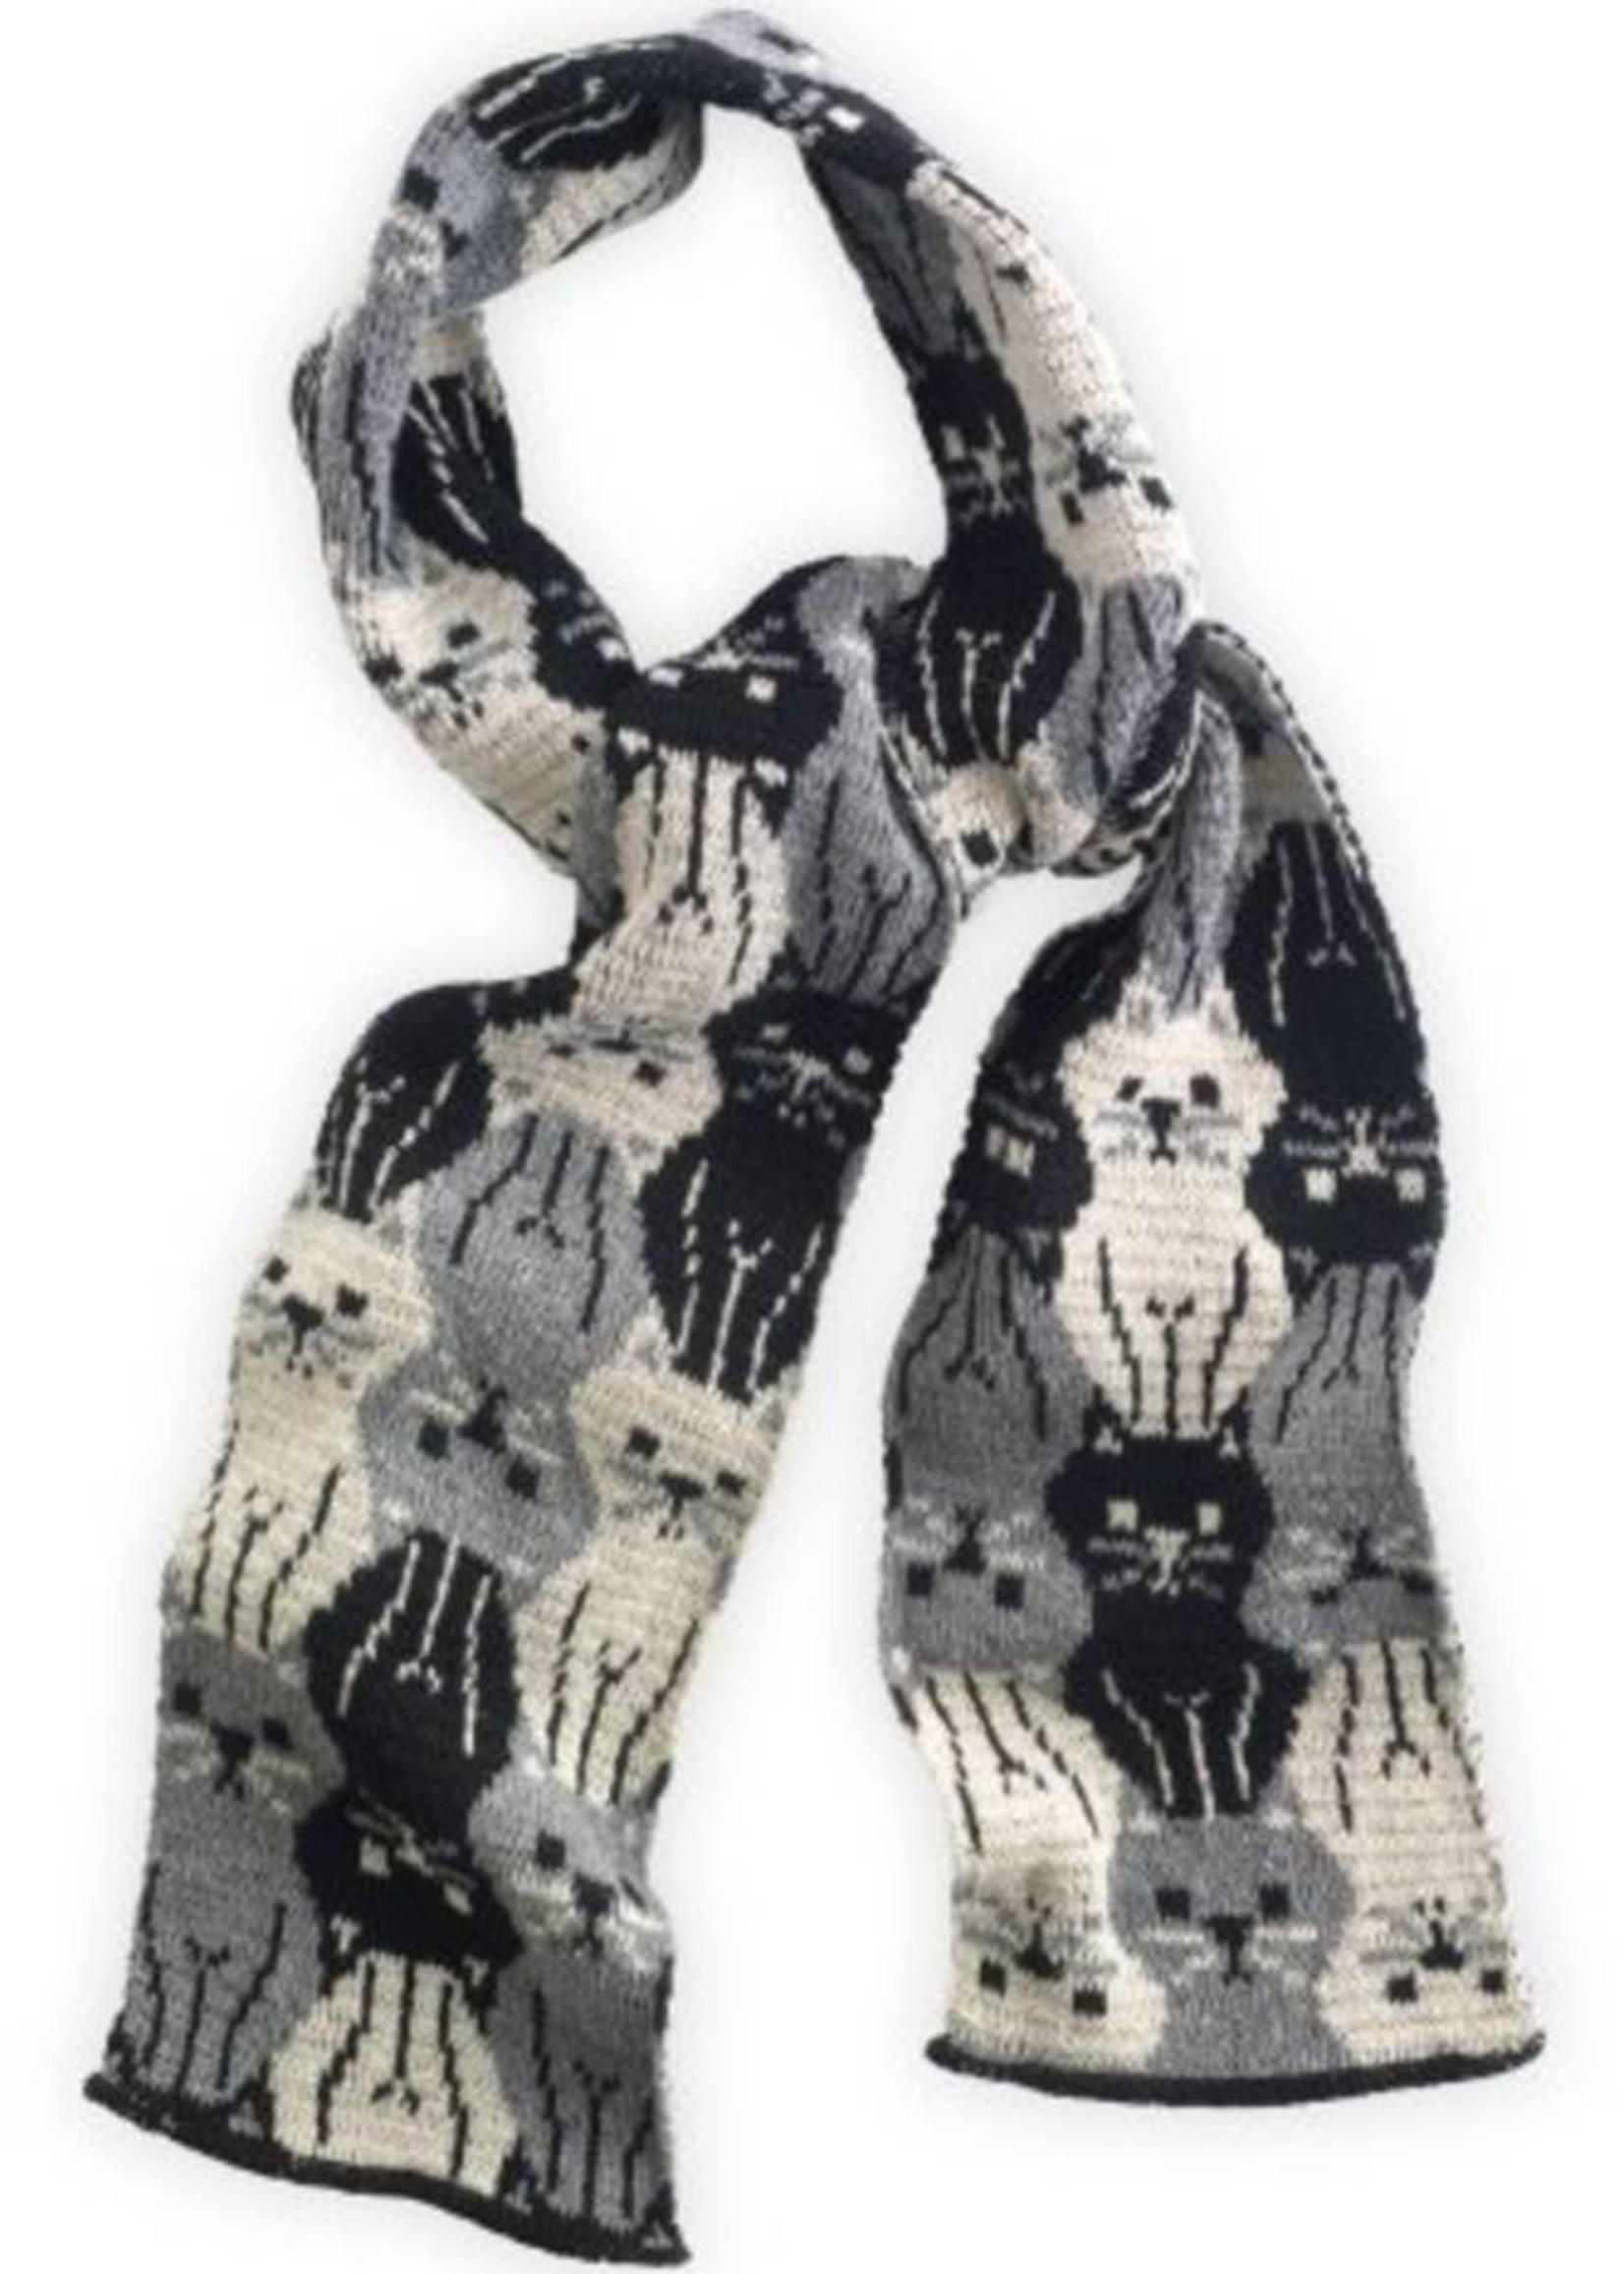 Green 3 Apparel Repeating Kitty scarf